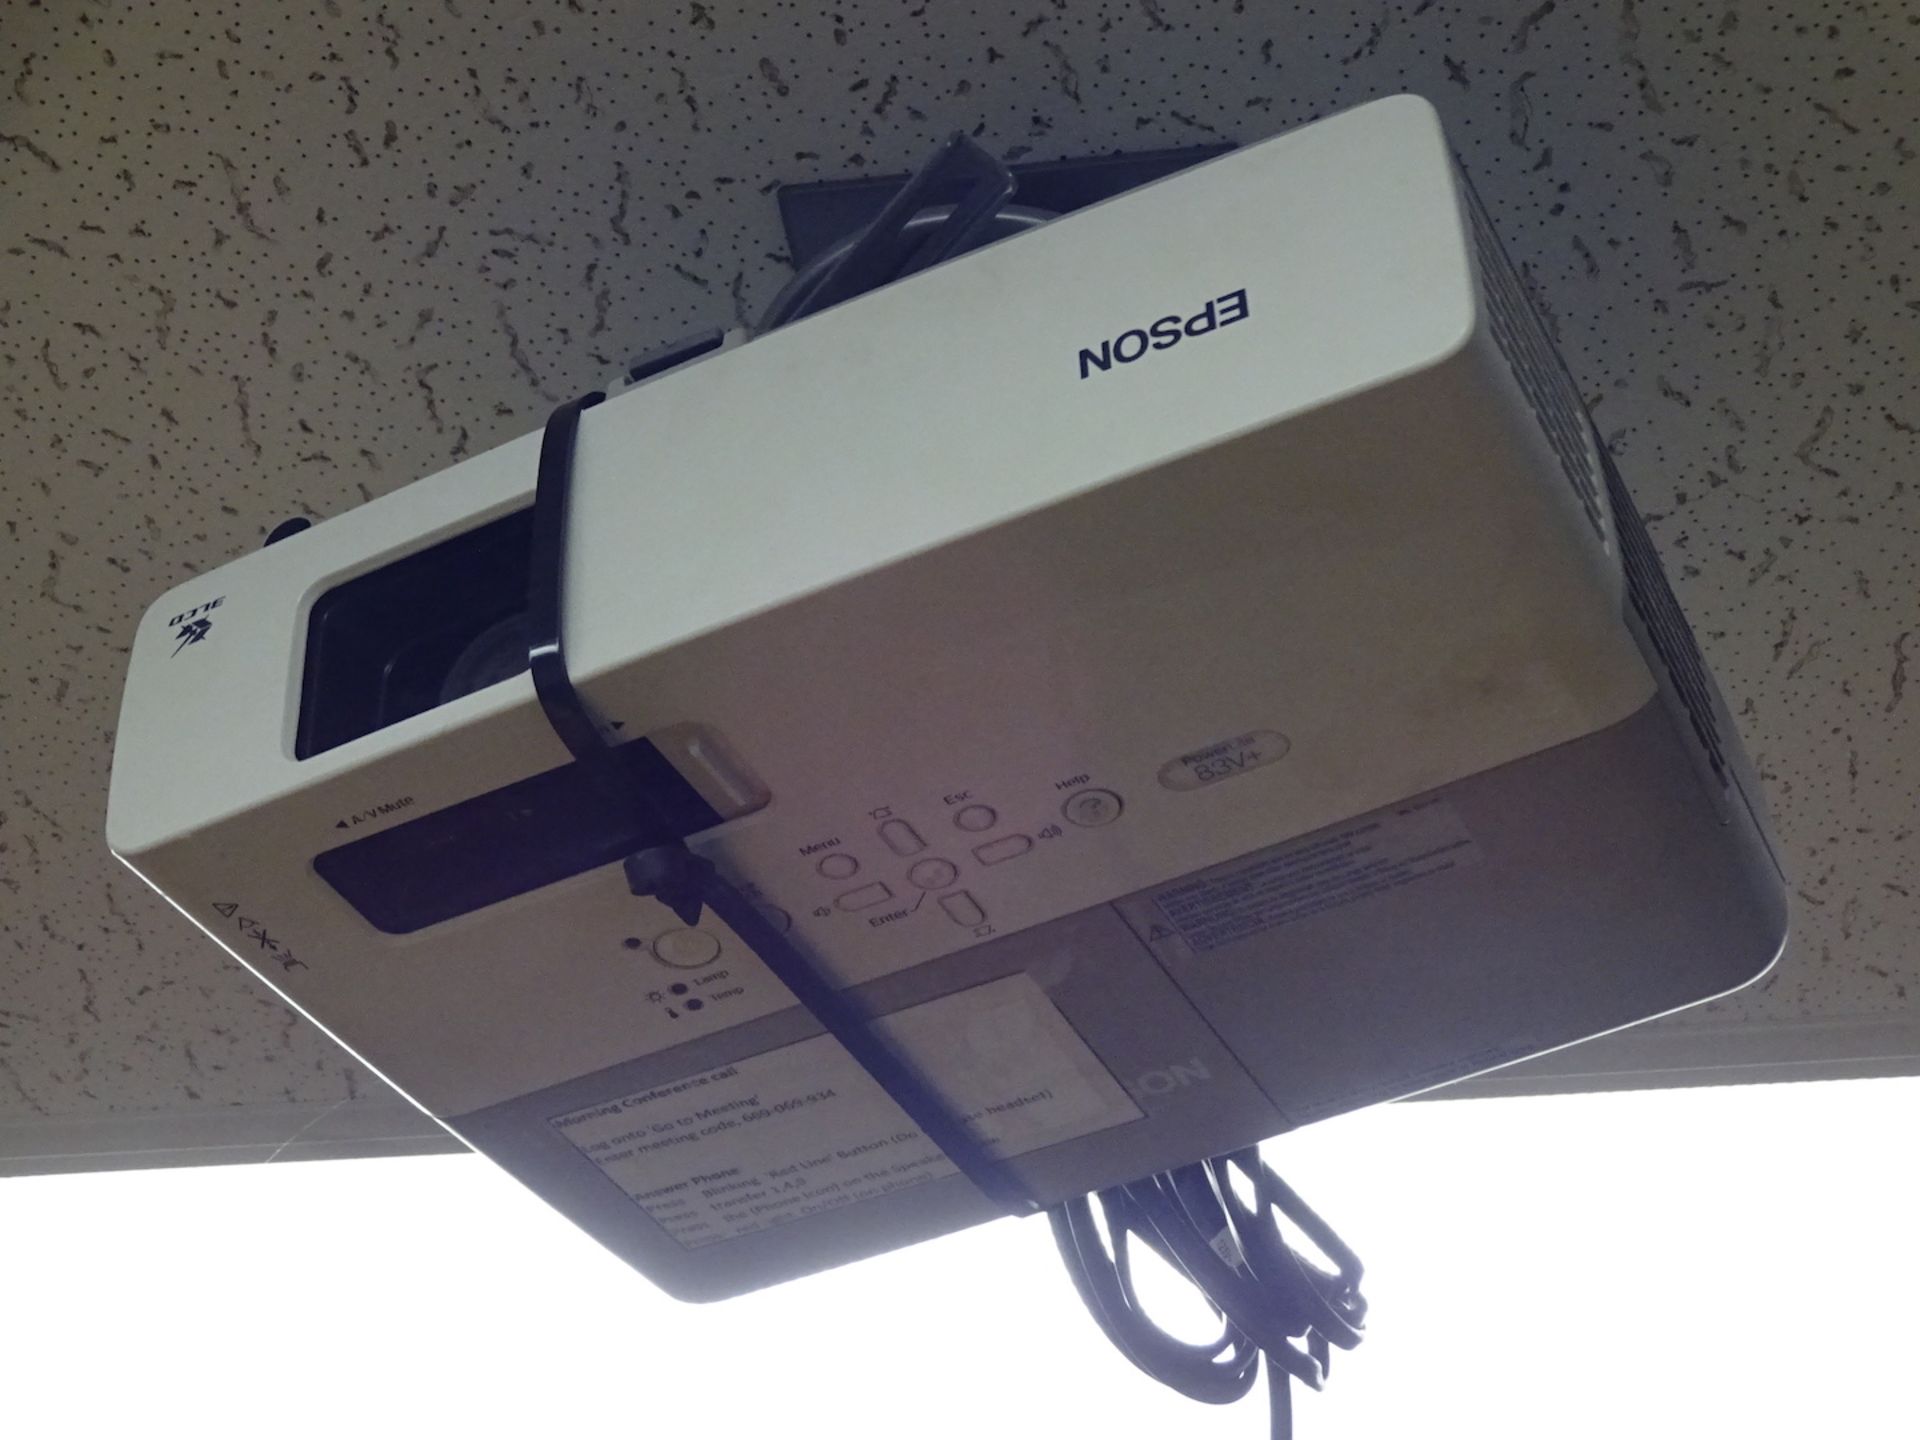 Epson Ceiling Mounted Projector, with Da-Lite Projection Screen (Elk Grove Village, IL) - Image 2 of 3